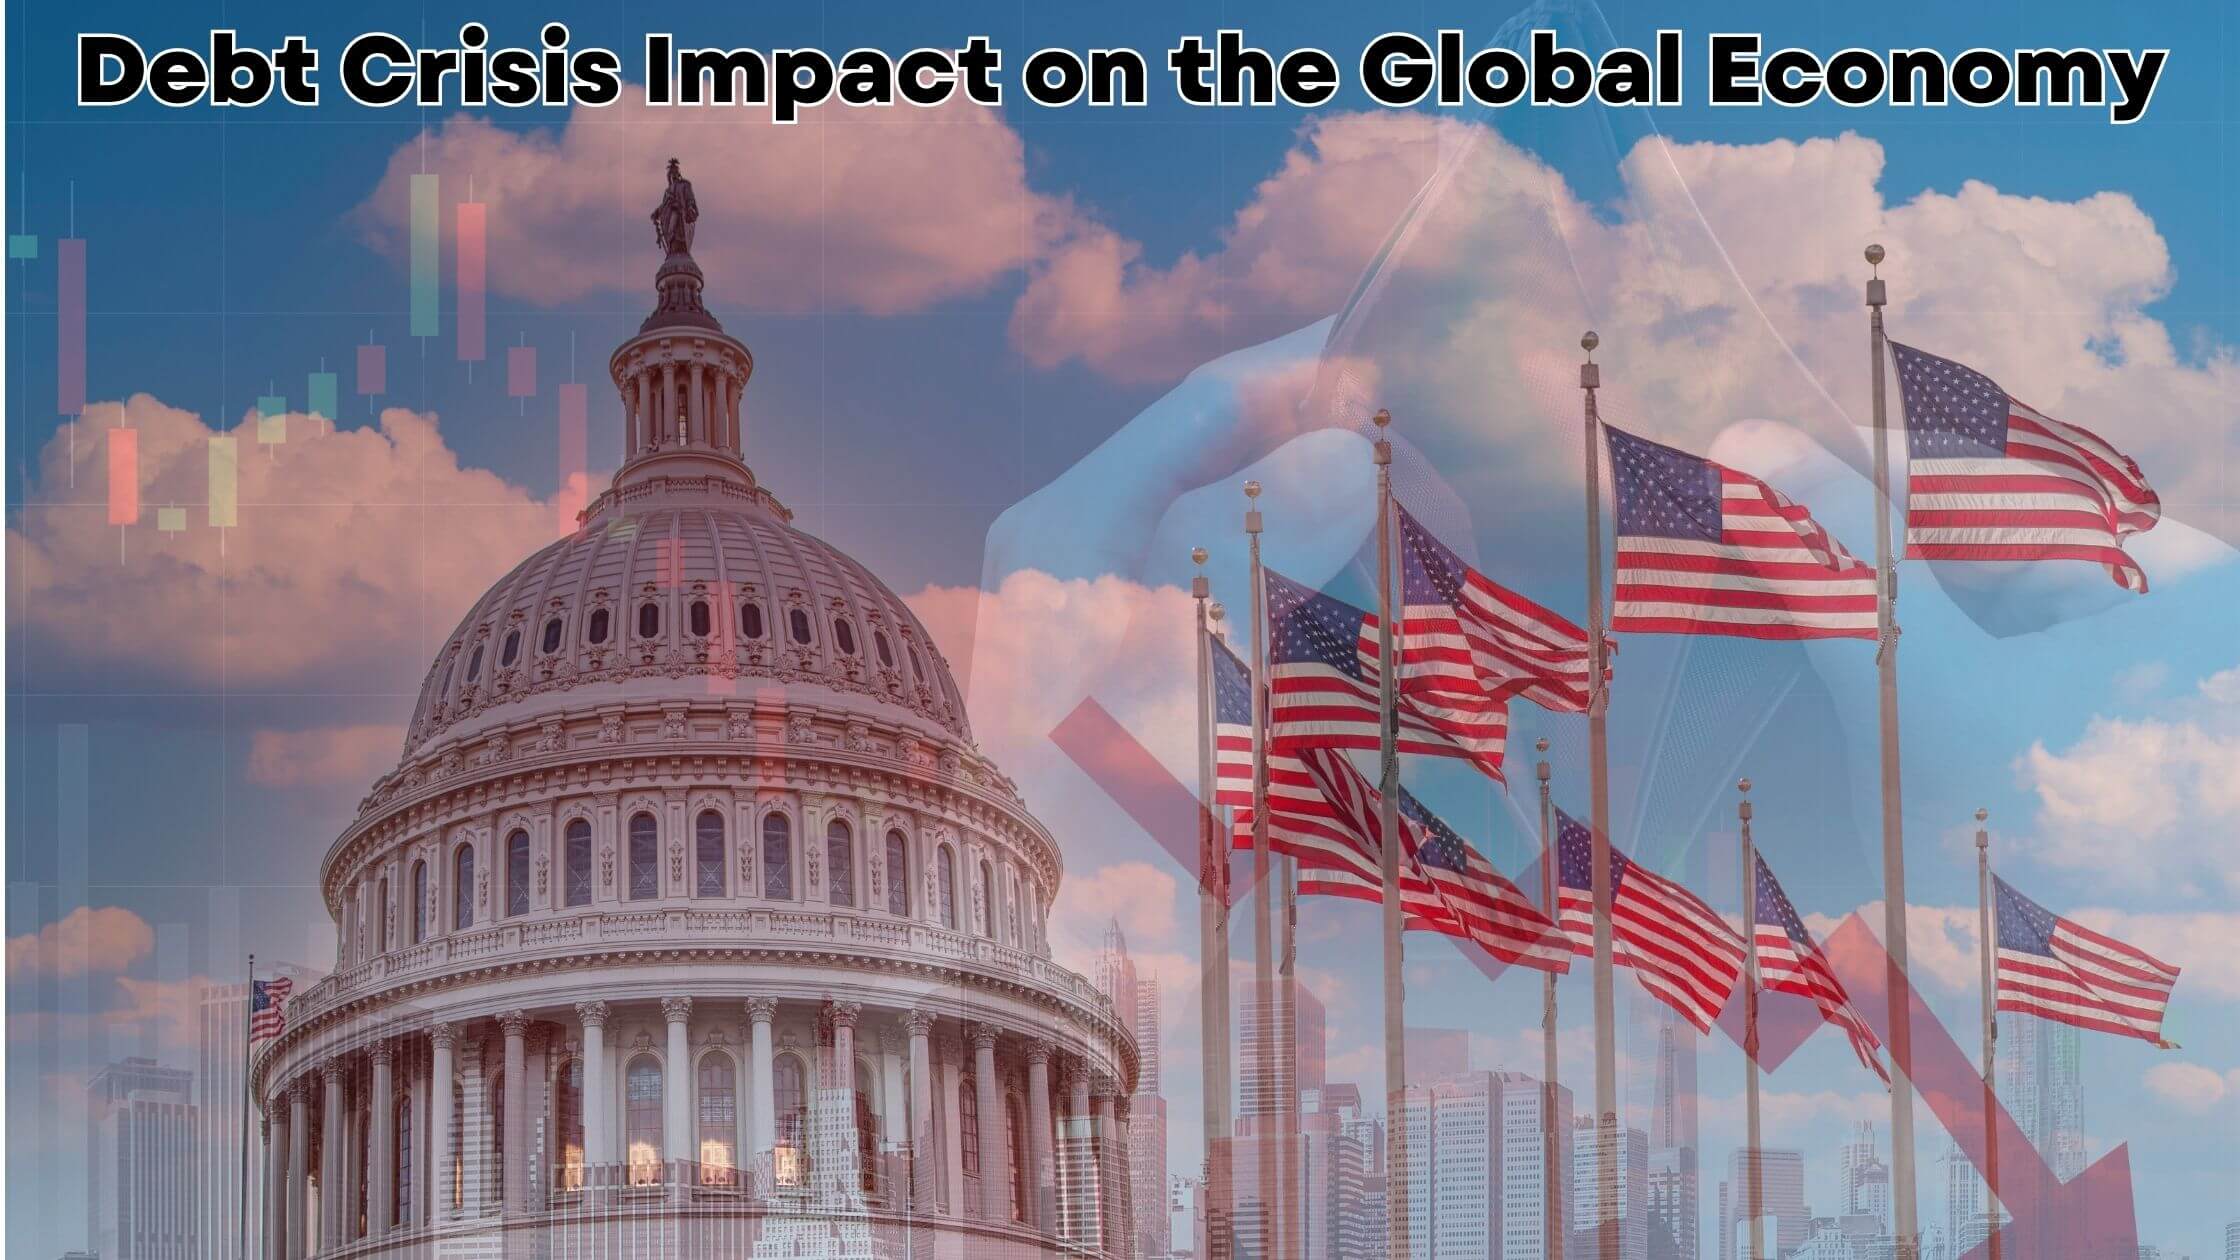 America and China’s Debt Crisis and its Impact on the Global Economy